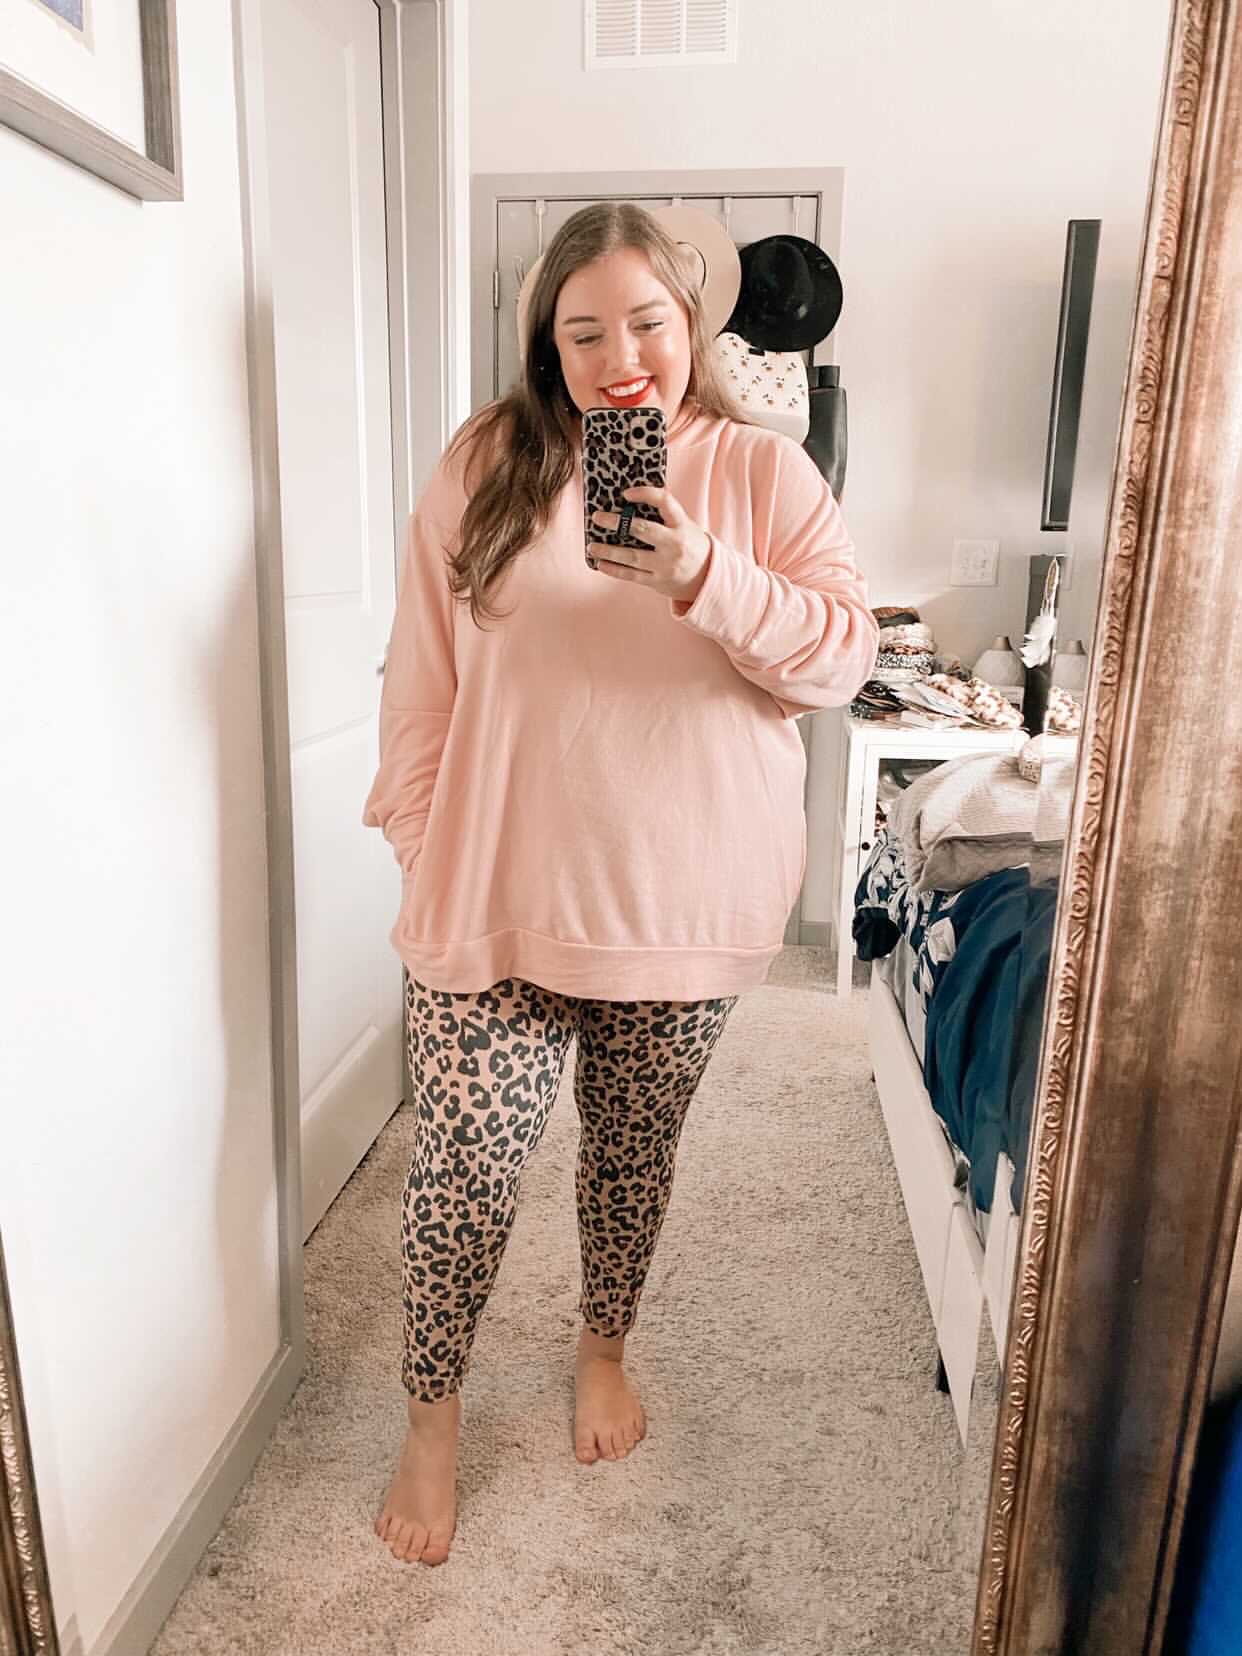 5 DAYS OF PLUS SIZE ATHLEISURE — House of Dorough